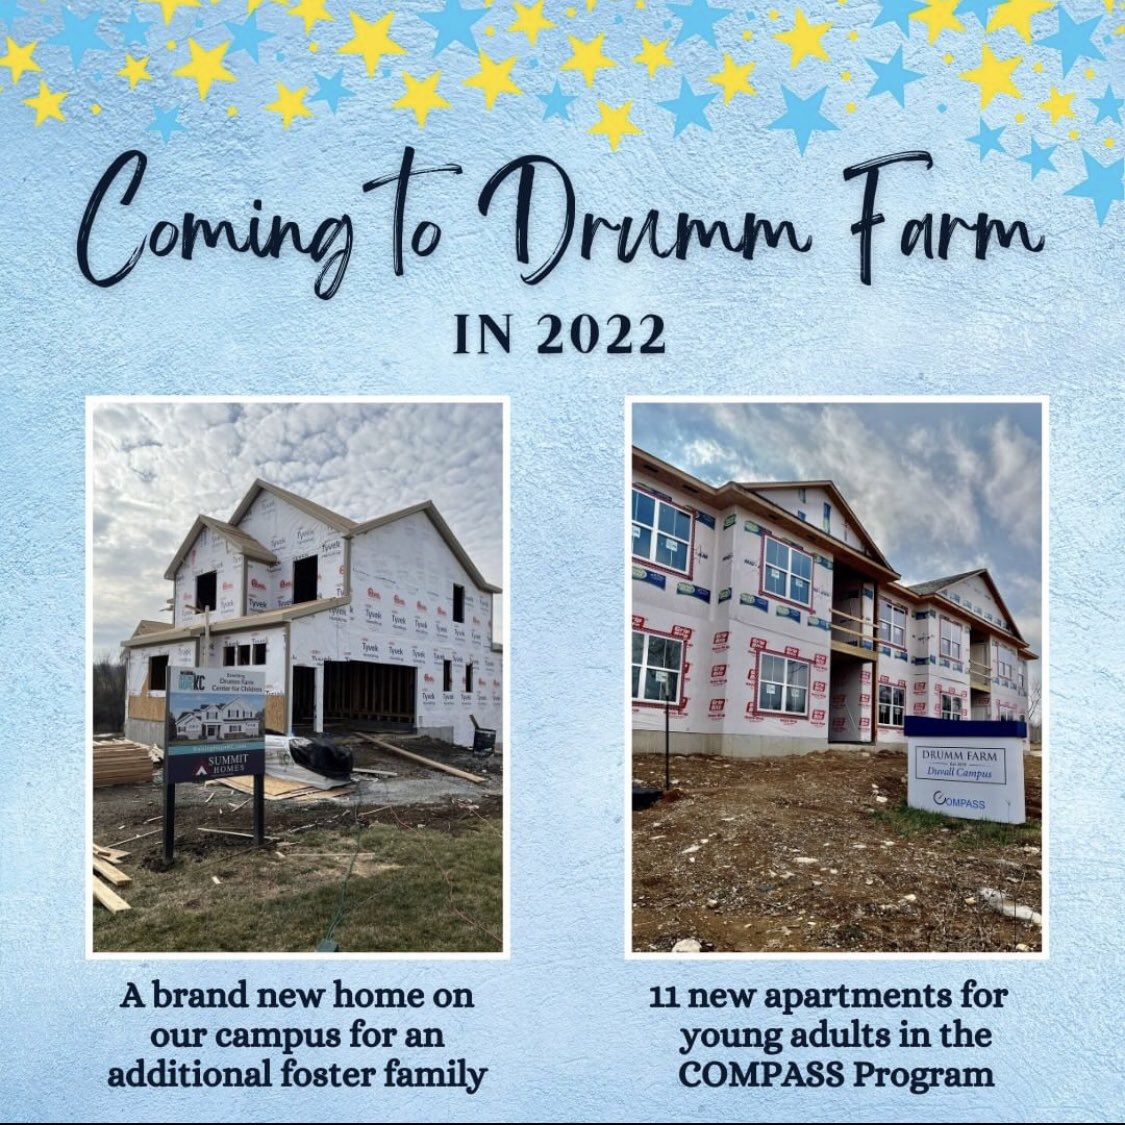 As the calendar turns to all things new, a look at what’s coming in 2022: Our compass program will soon house more than 30 young adults experiencing homelessness, & our neighborhood of foster homes will grow, allowing more children to receive the care and resources we all deserve